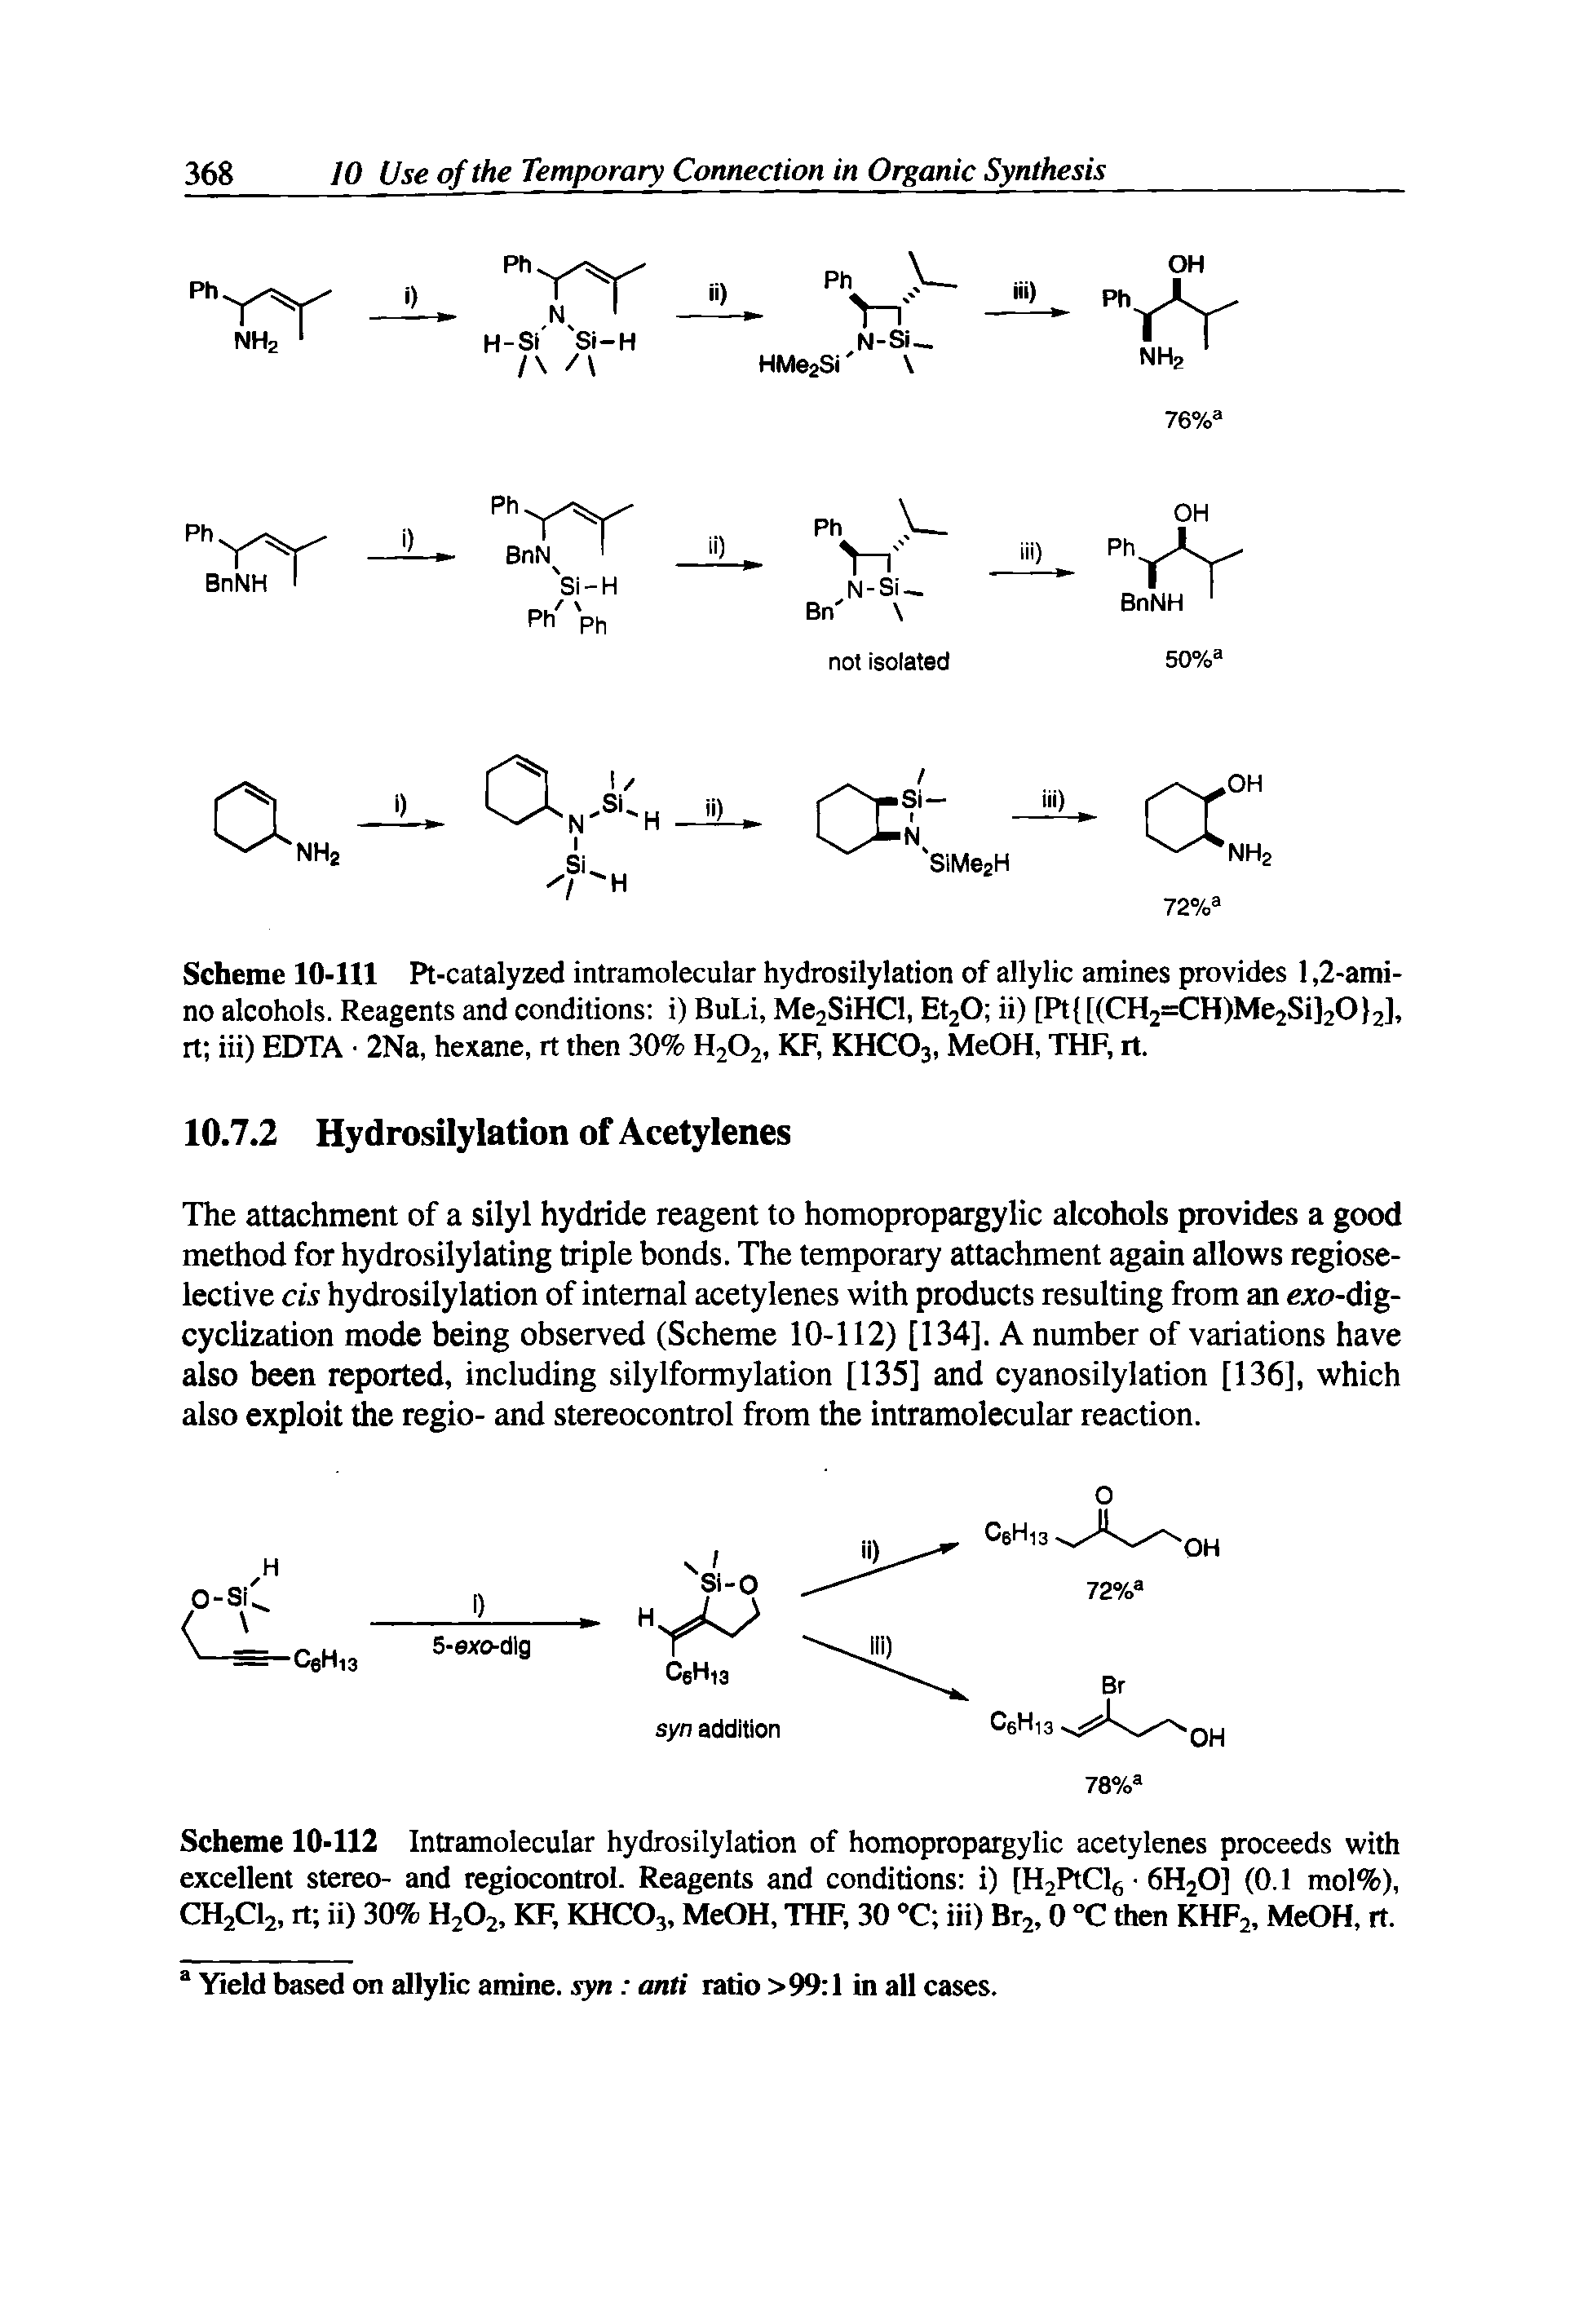 Scheme 10-111 Pt-catalyzed intramolecular hydrosilylation of allylic amines provides 1,2-amino alcohols. Reagents and conditions i) BuLi, Me2SiHCl, Et20 ii) [Pt [(CH2=CH)Me2Si]20 2], rt iii) EDTA 2Na, hexane, rt then 30% H2O2, KF, KHCO3, MeOH, THF, rt.